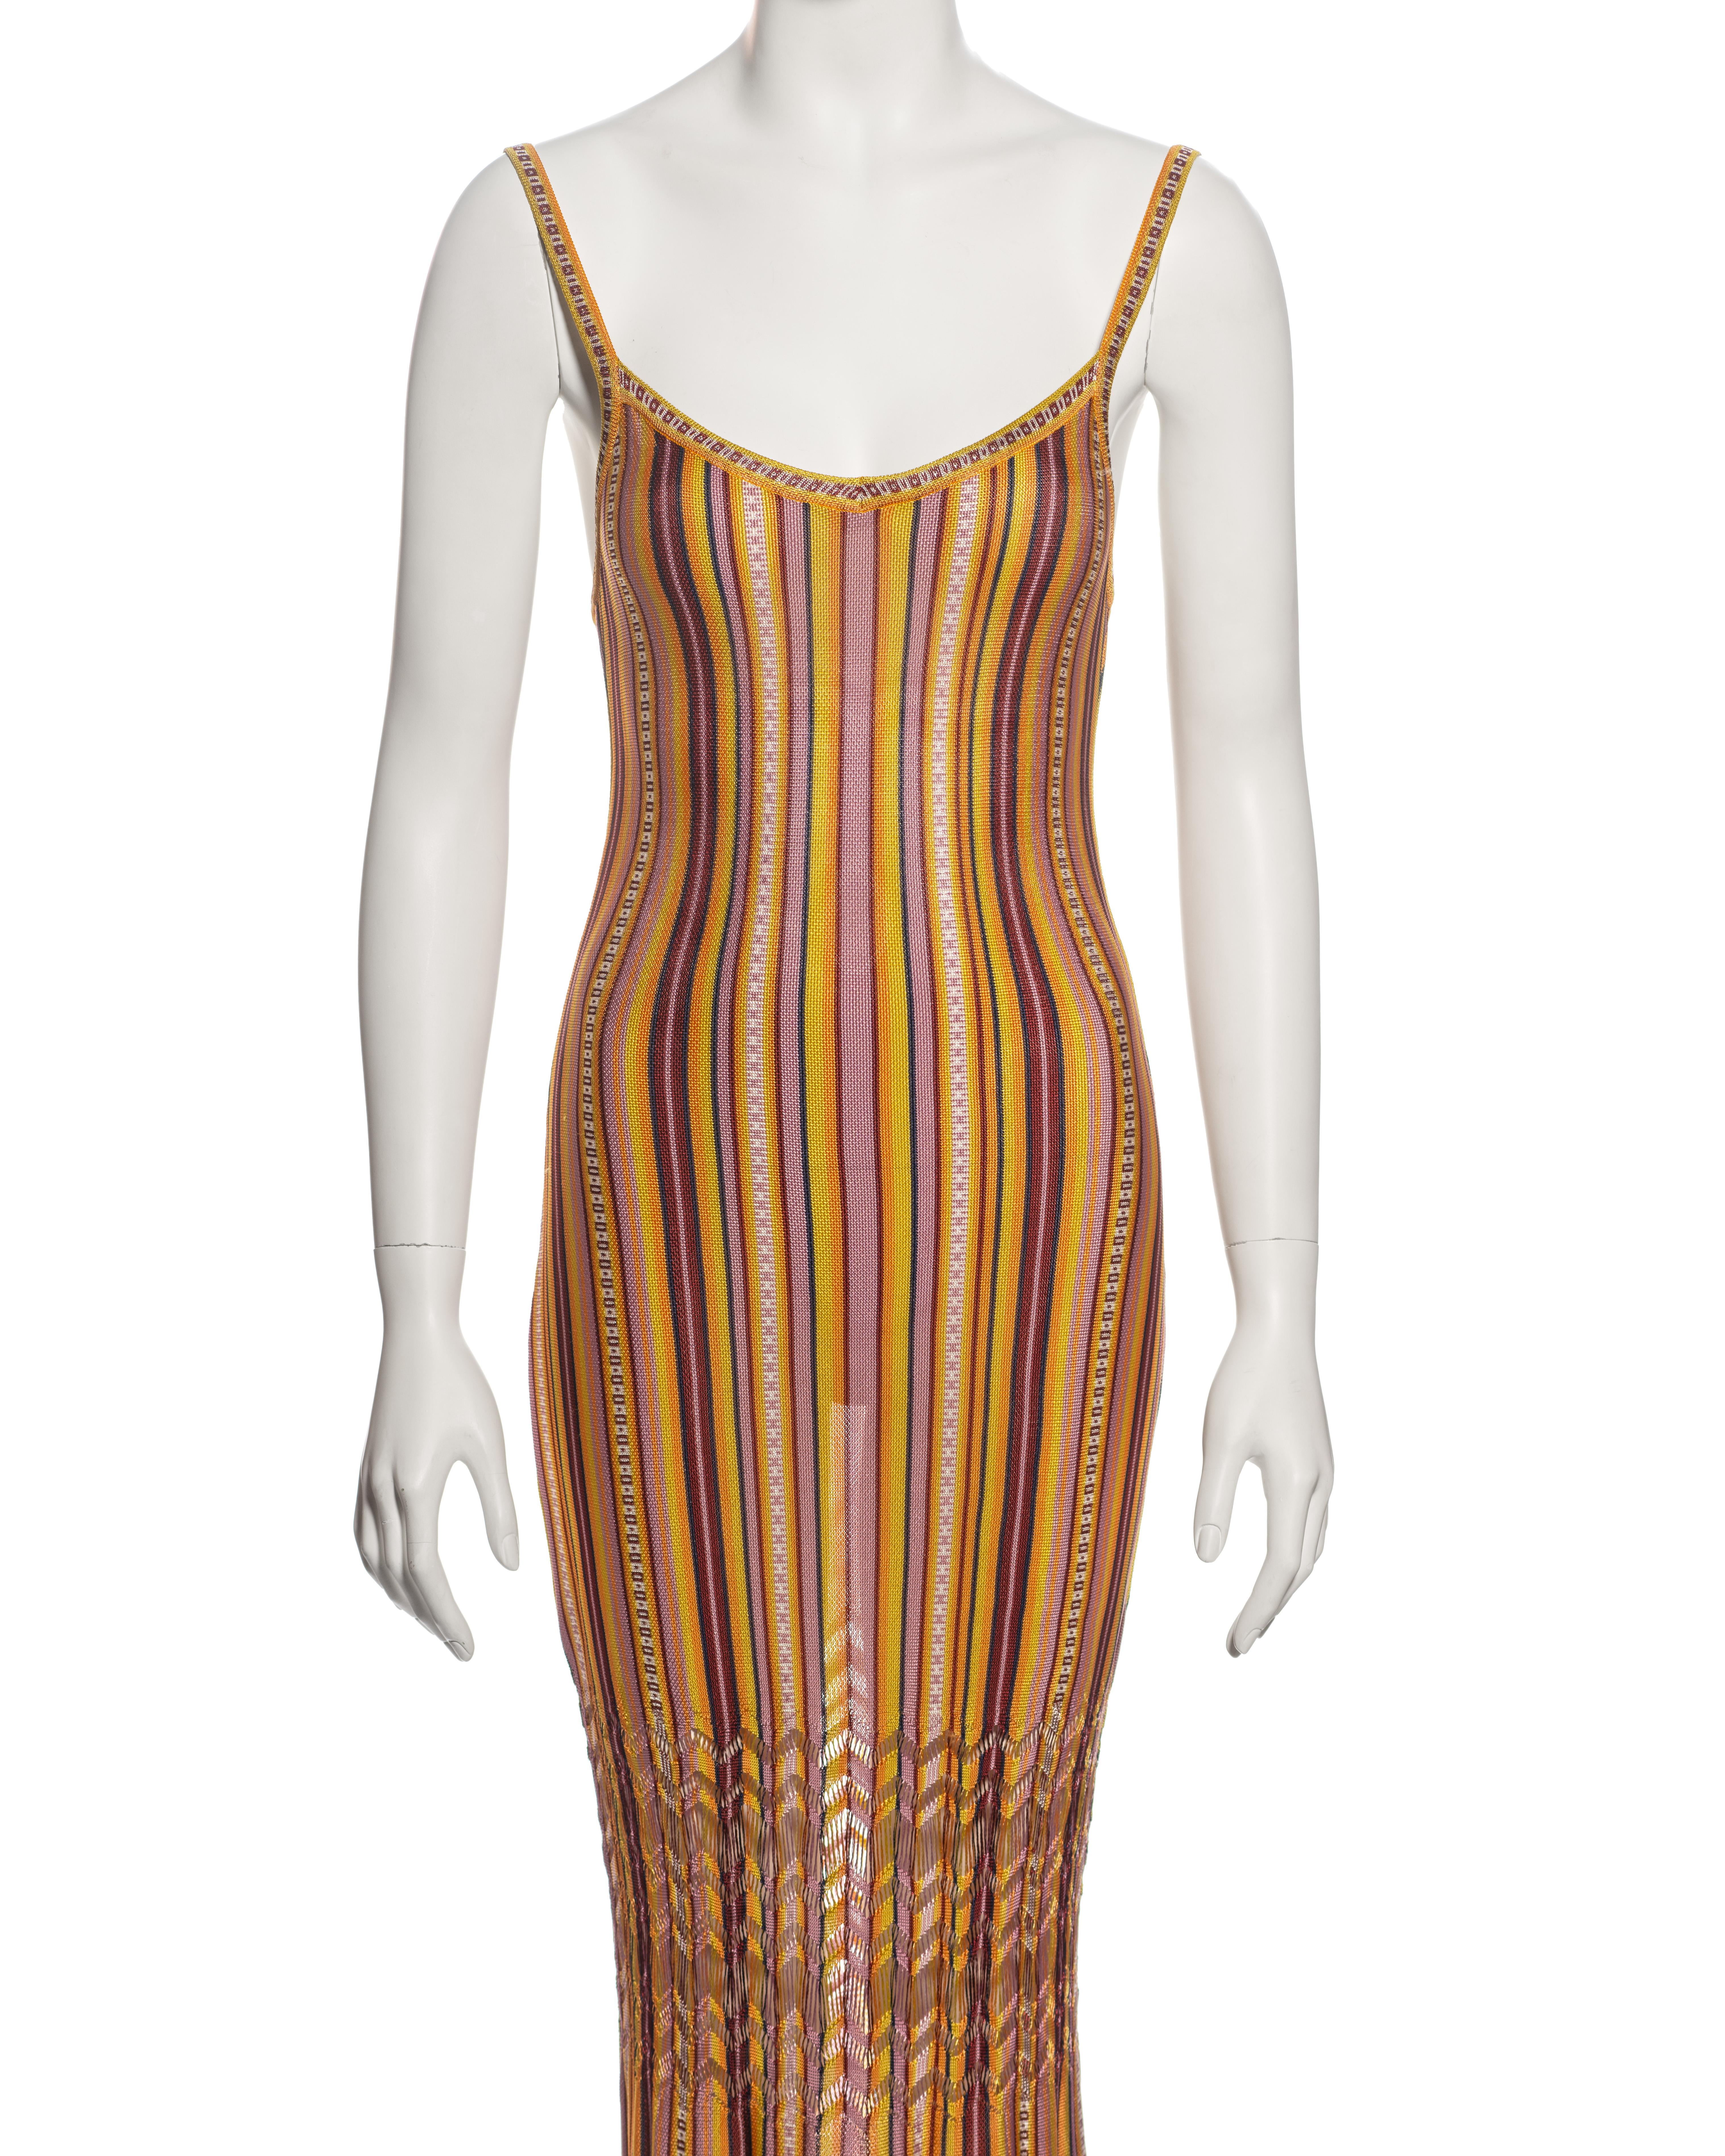 Christian Dior by John Galliano Striped Knit Maxi Dress and Cardigan, ss 2002 For Sale 2